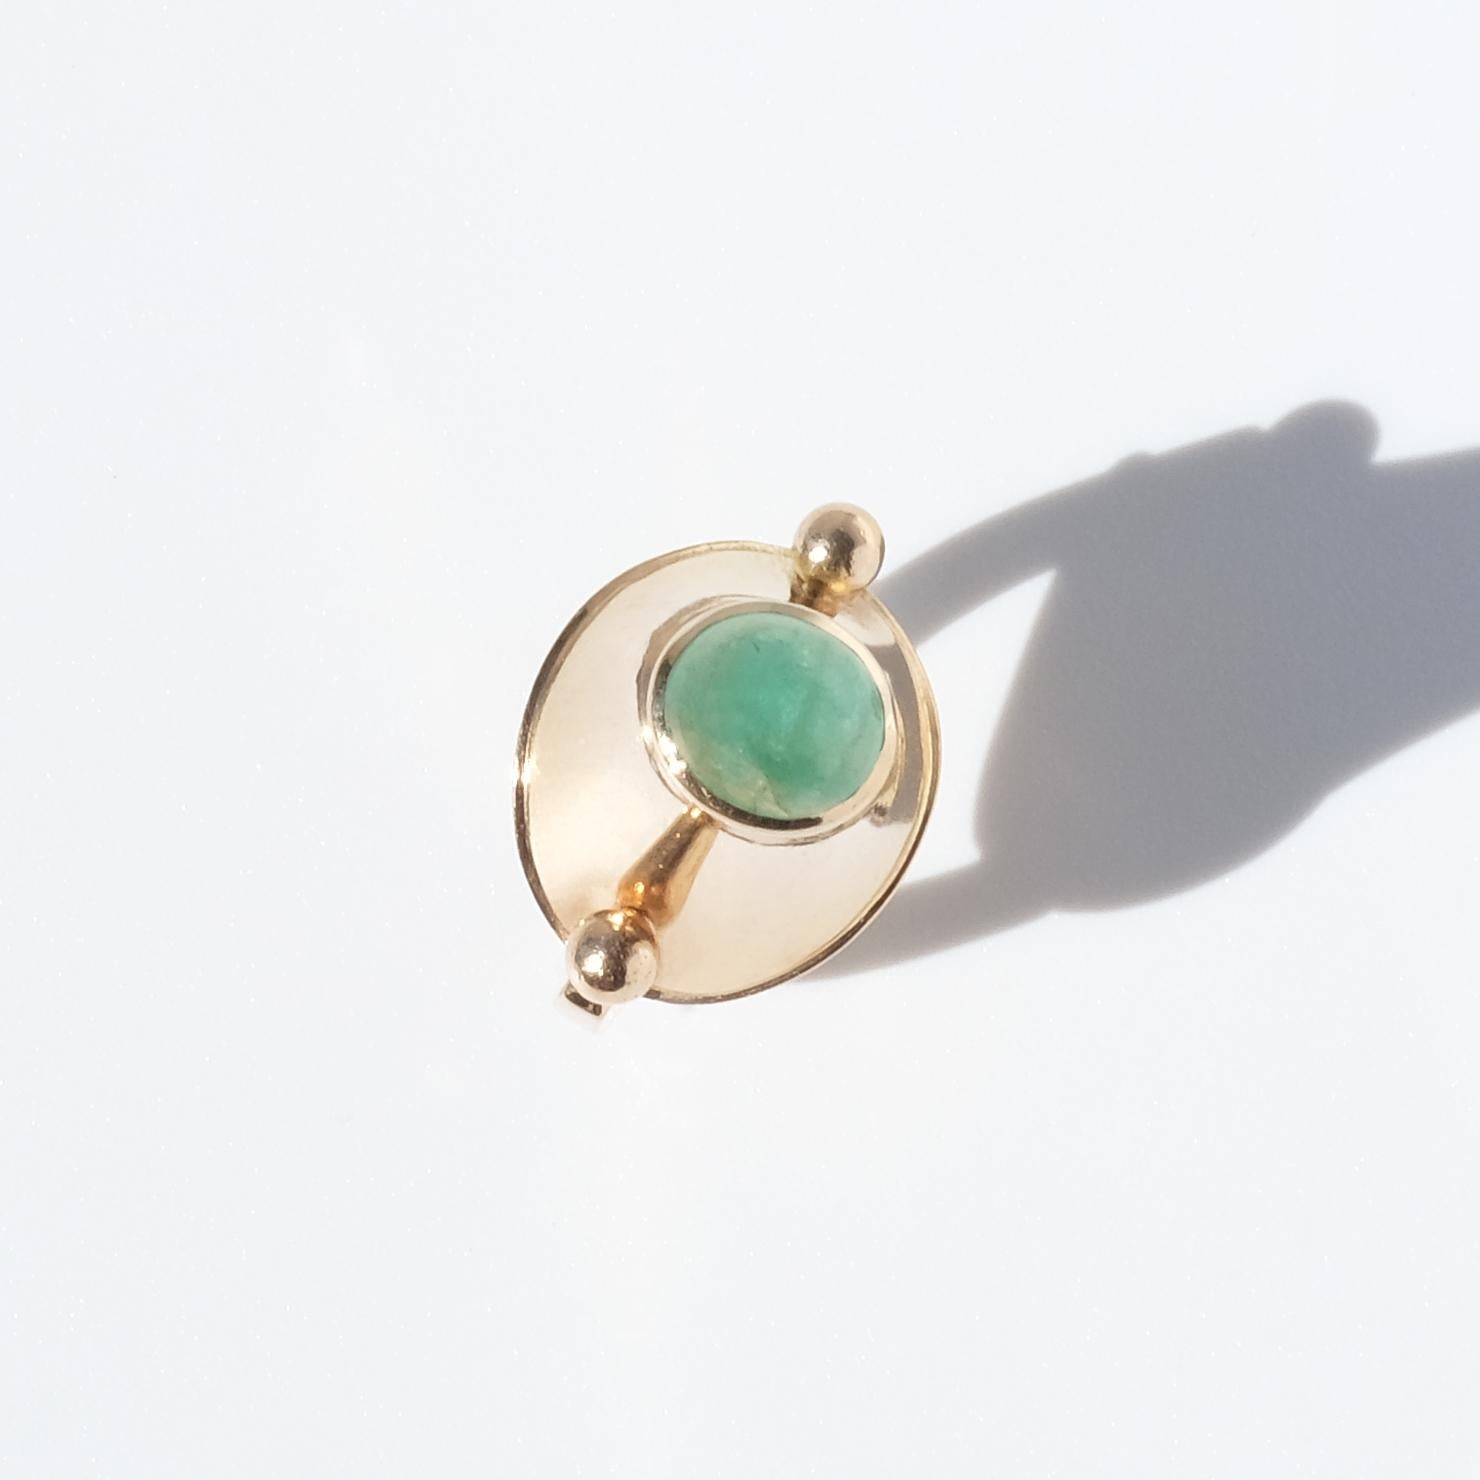 Swedish 18 K Gold Ring with an Emerald Made in 1966, Sigurd Persson 9